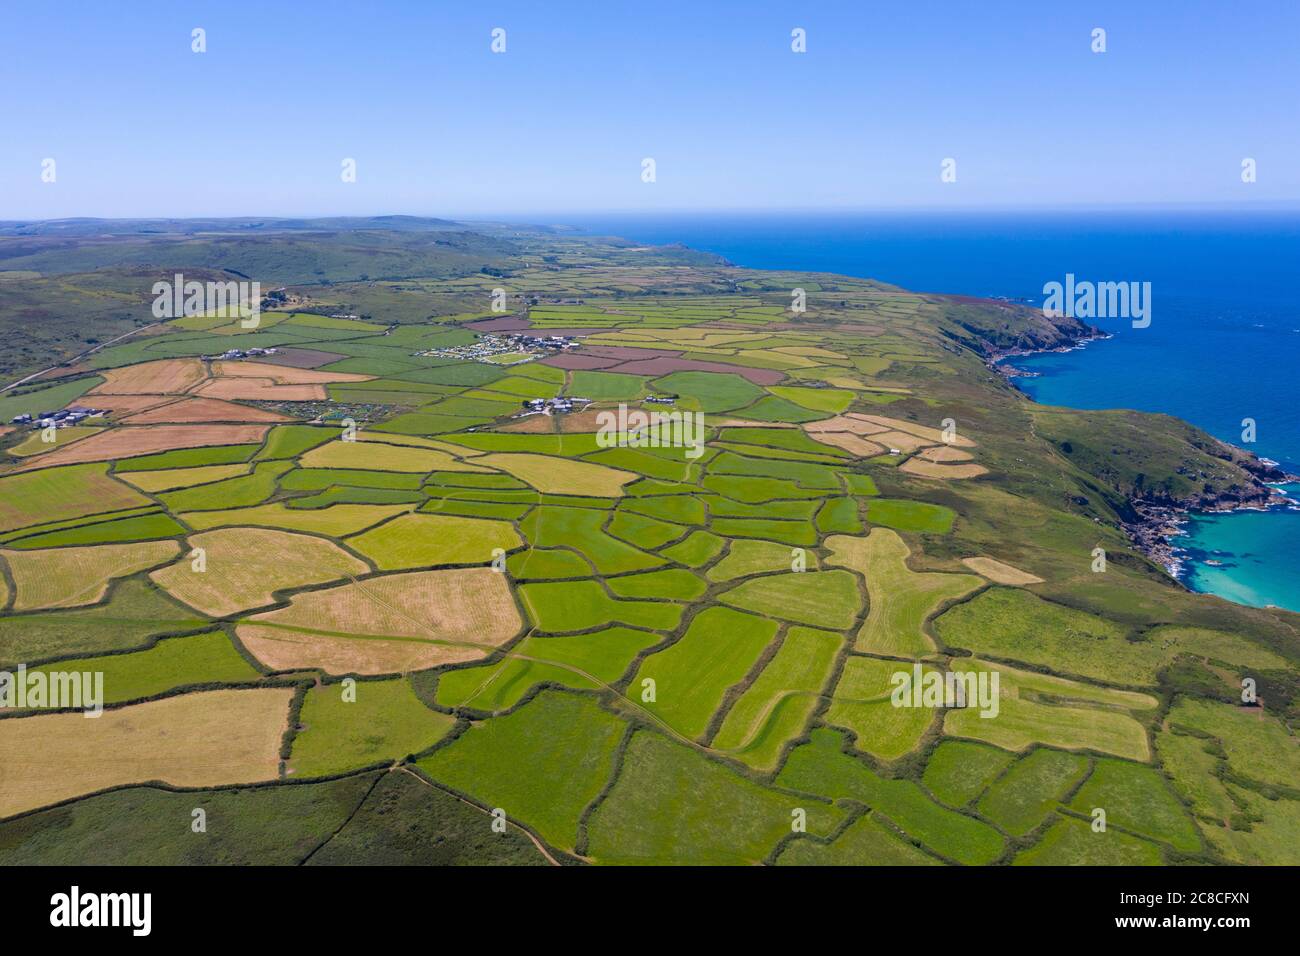 Aerial photograph of St Ives, Cornwall, England, United Kingdom Stock Photo